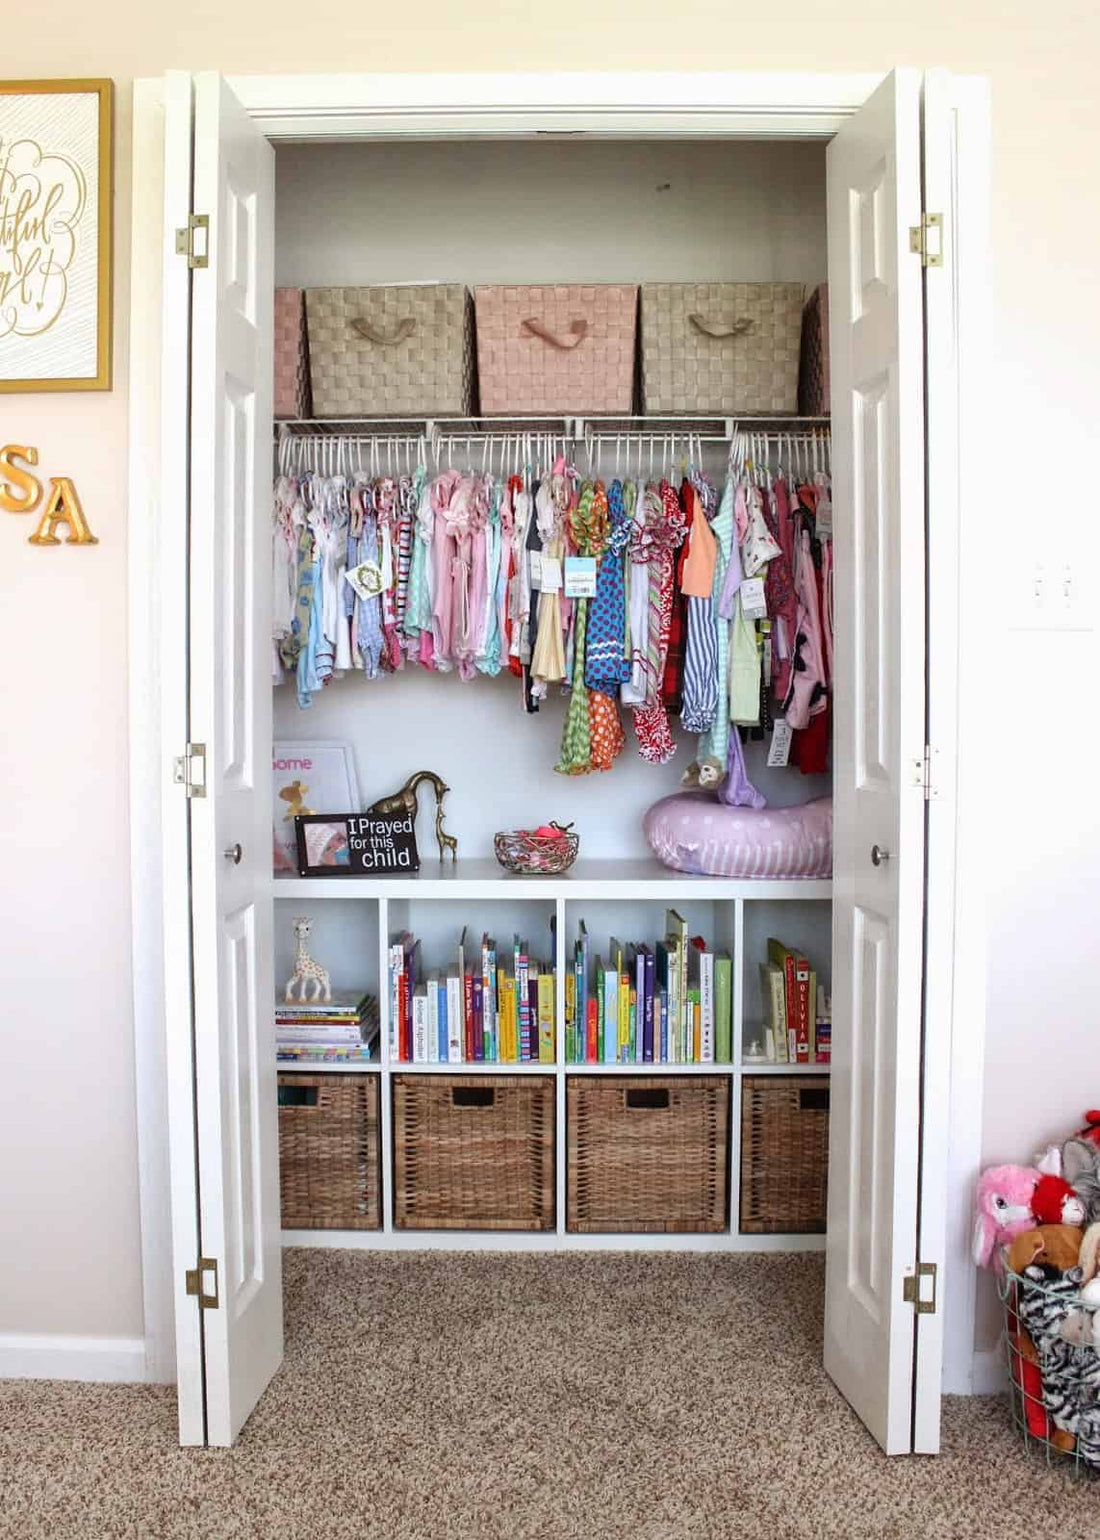 Managing closet space can be an absolute nightmare! I’m sure I’m not the only one that has spent countless hours scouring Pinterest for some help and tips on how to wrangle the closet mess